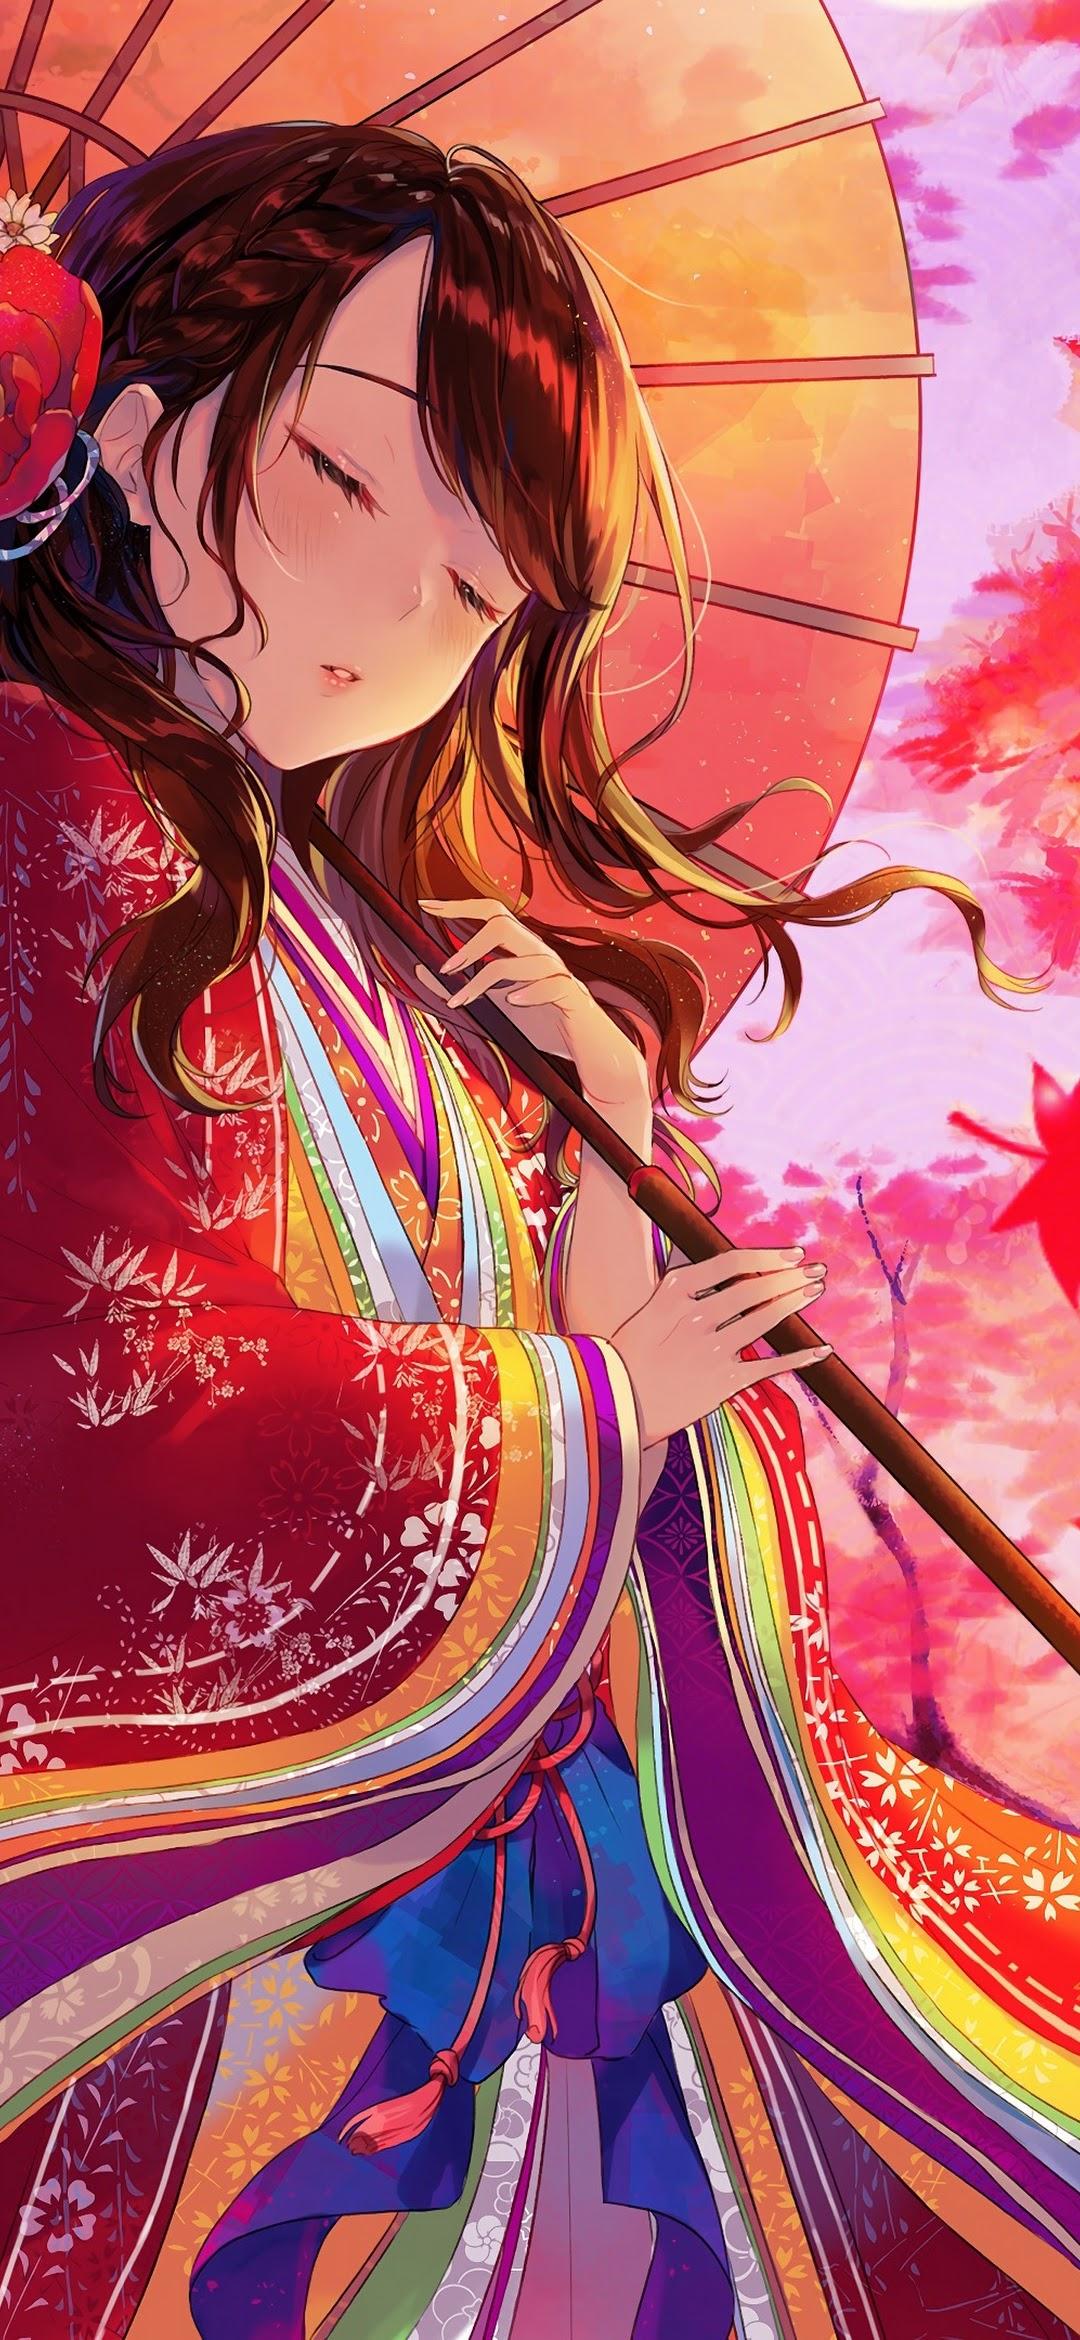 Anime Redmi Note 8 Wallpapers - Wallpaper Cave